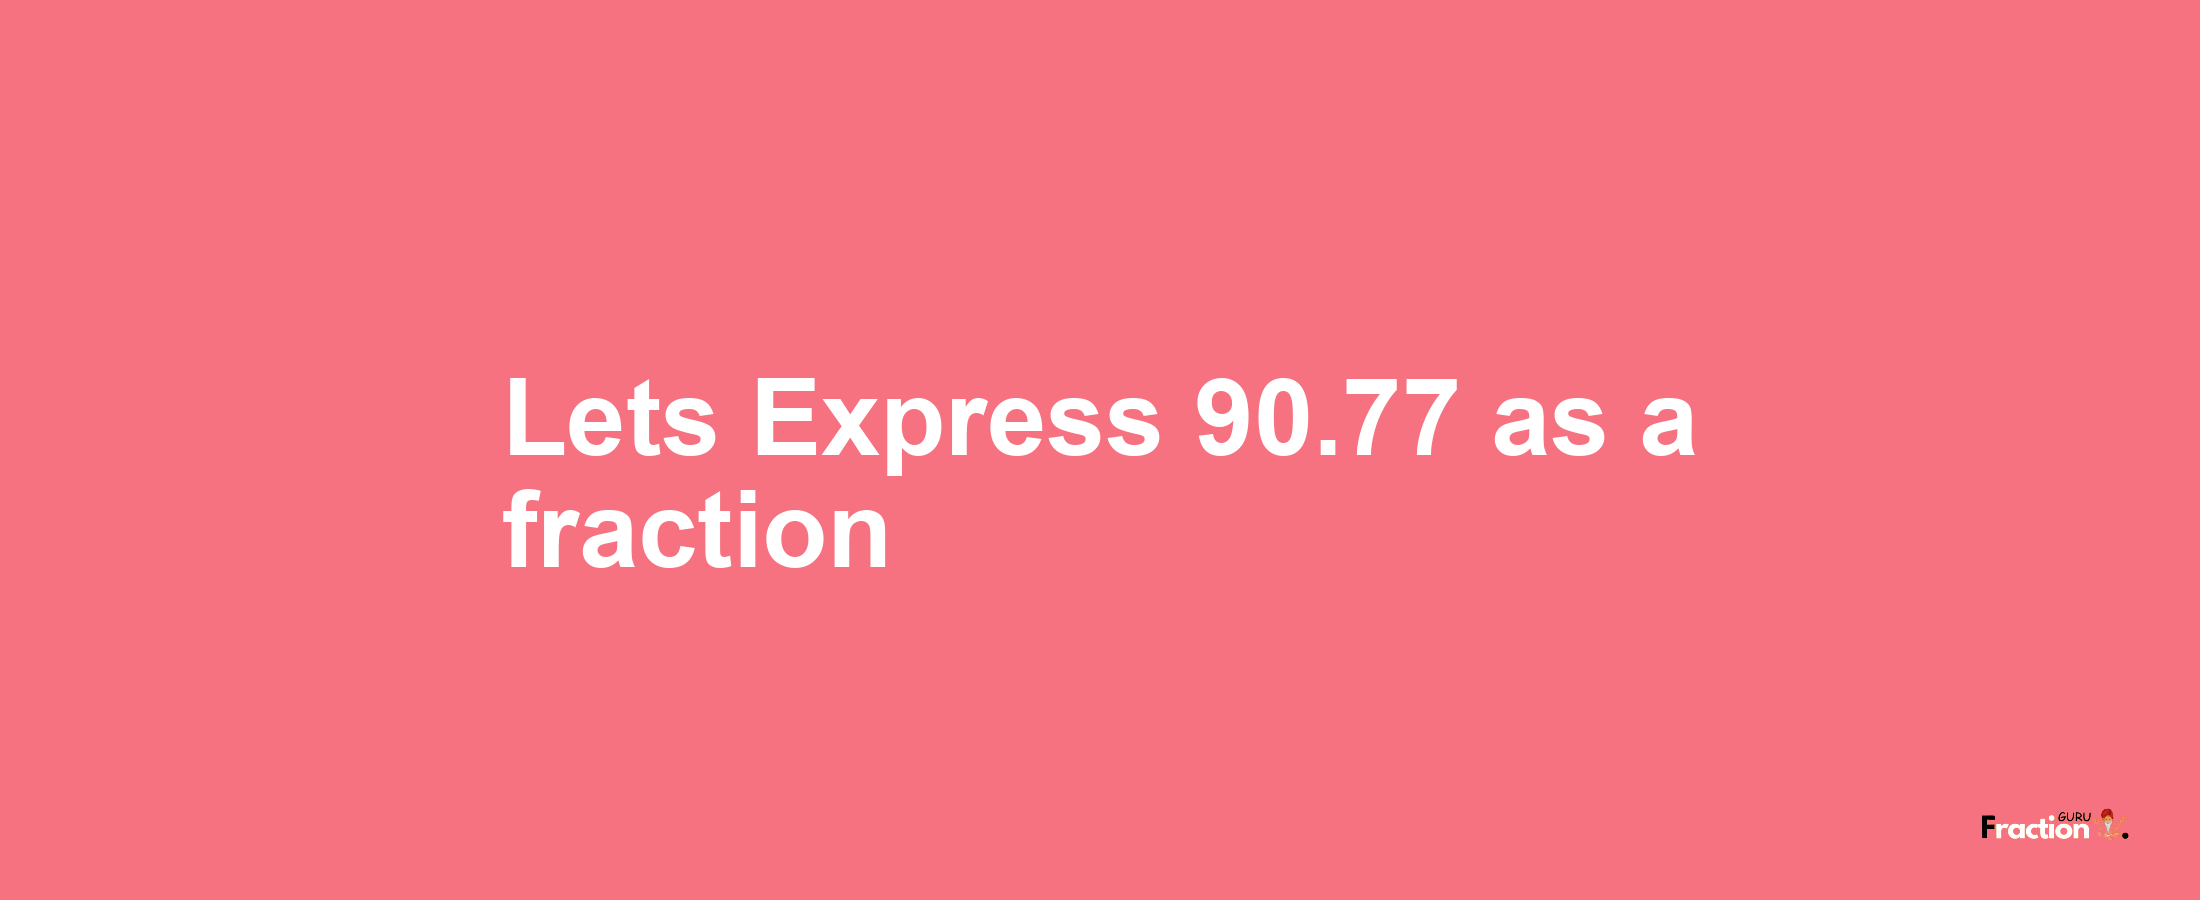 Lets Express 90.77 as afraction